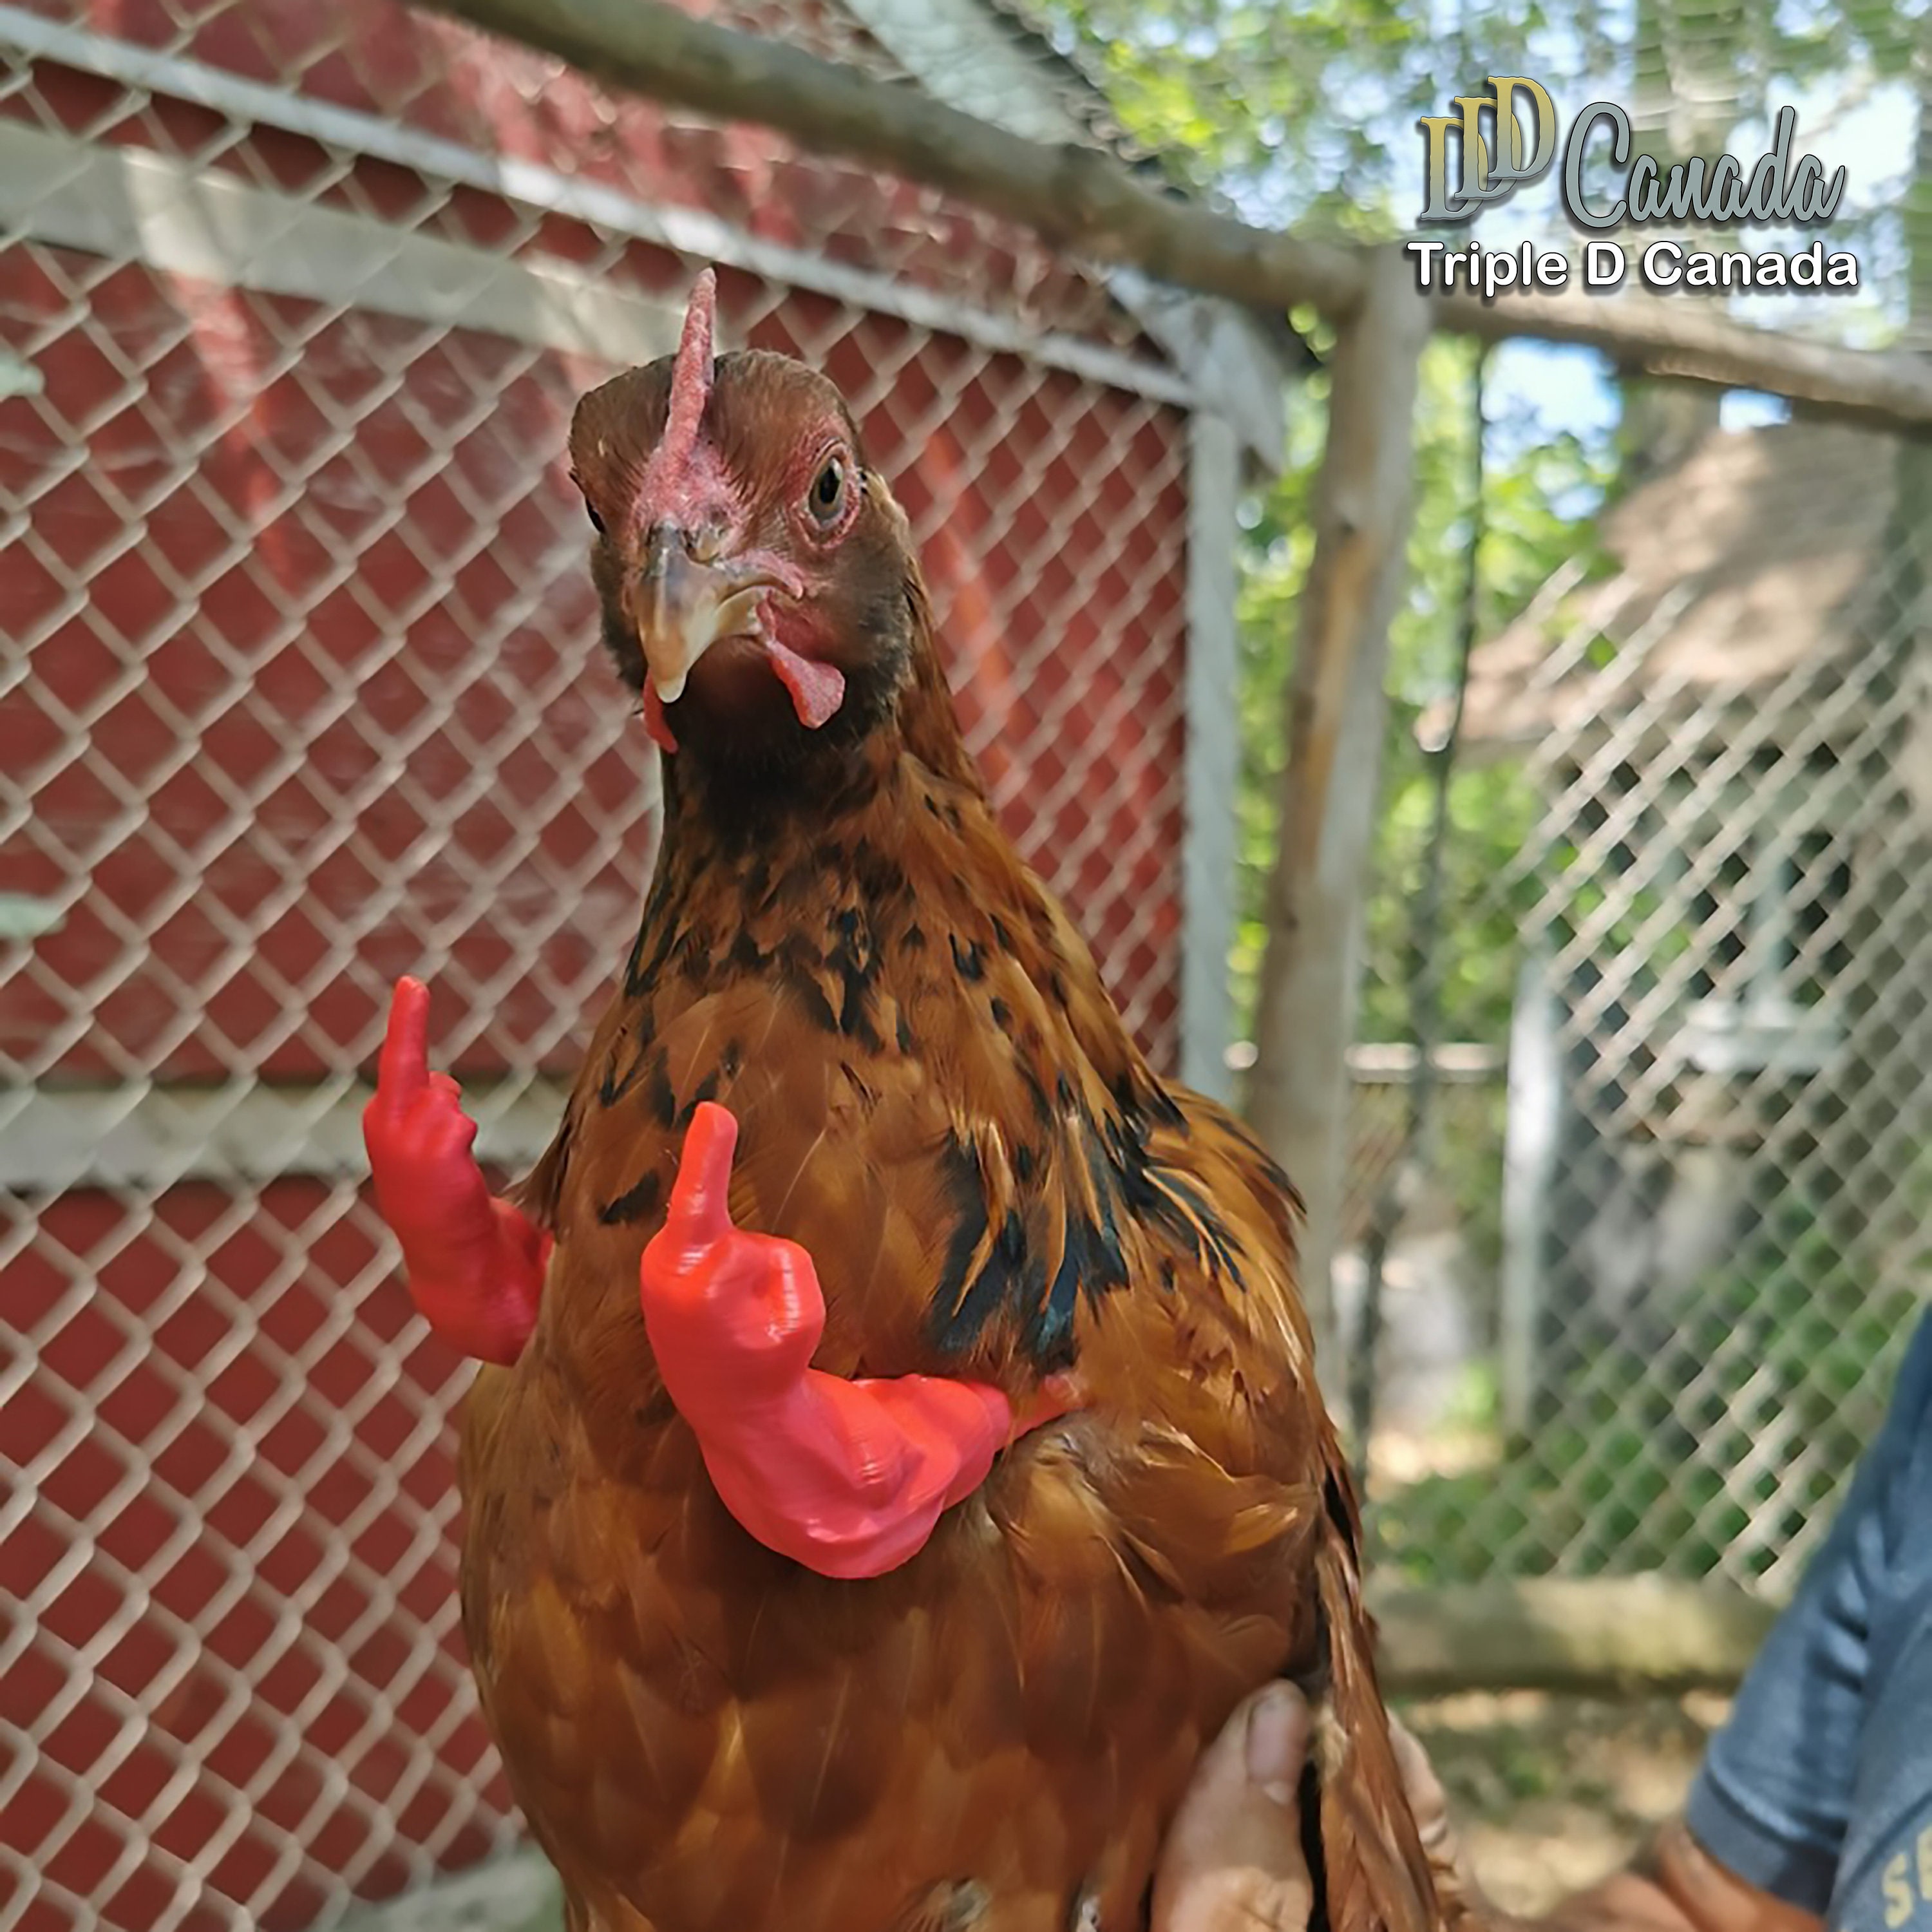 Middle Finger Muscle Arms for Chickens 